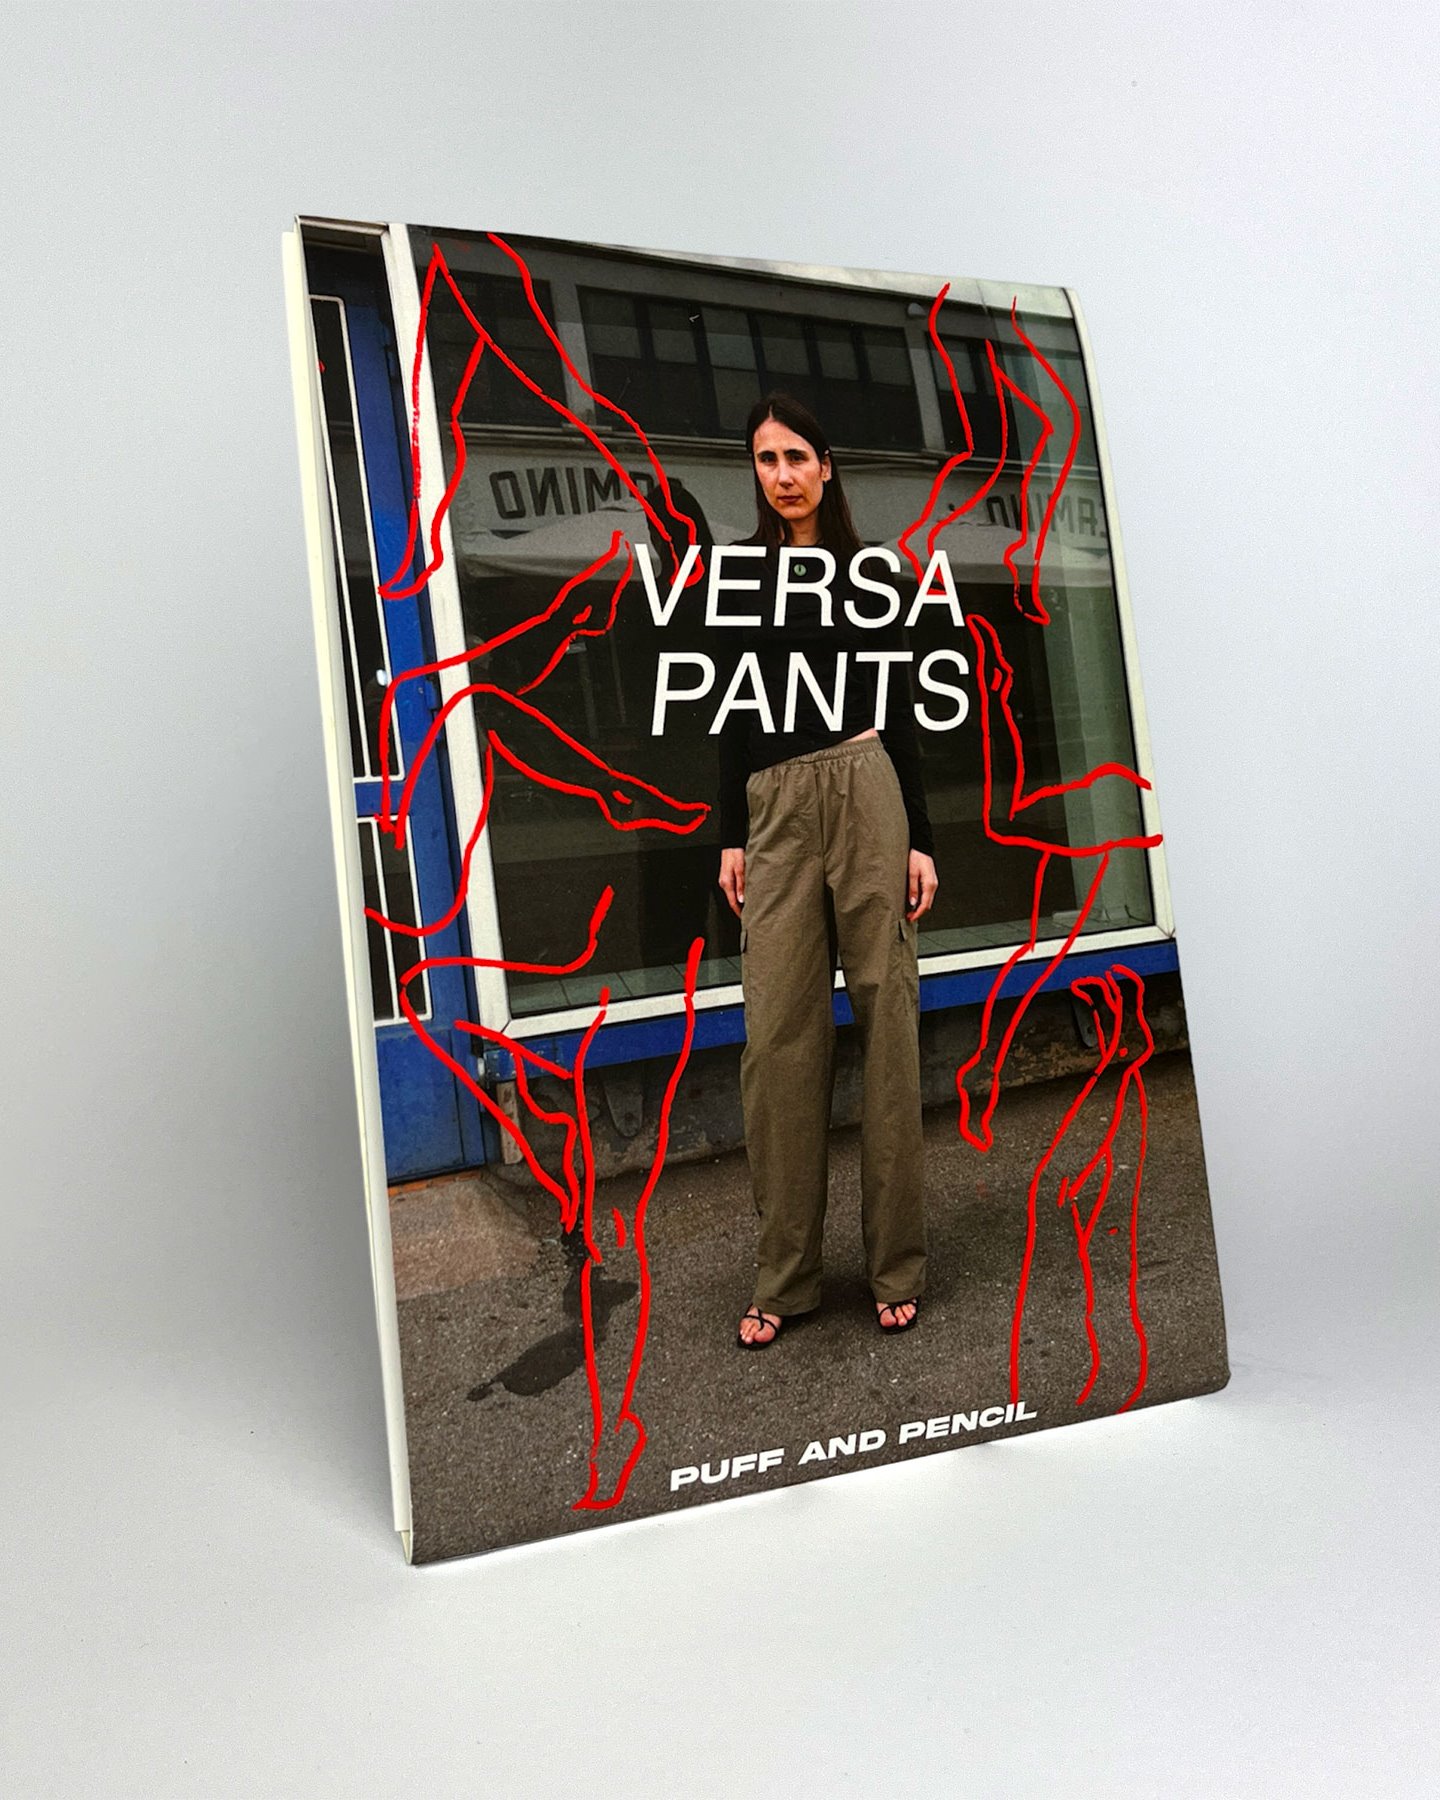 Puff and Pencil sewing pattern "Versa pants" 1100304_pack.jpg